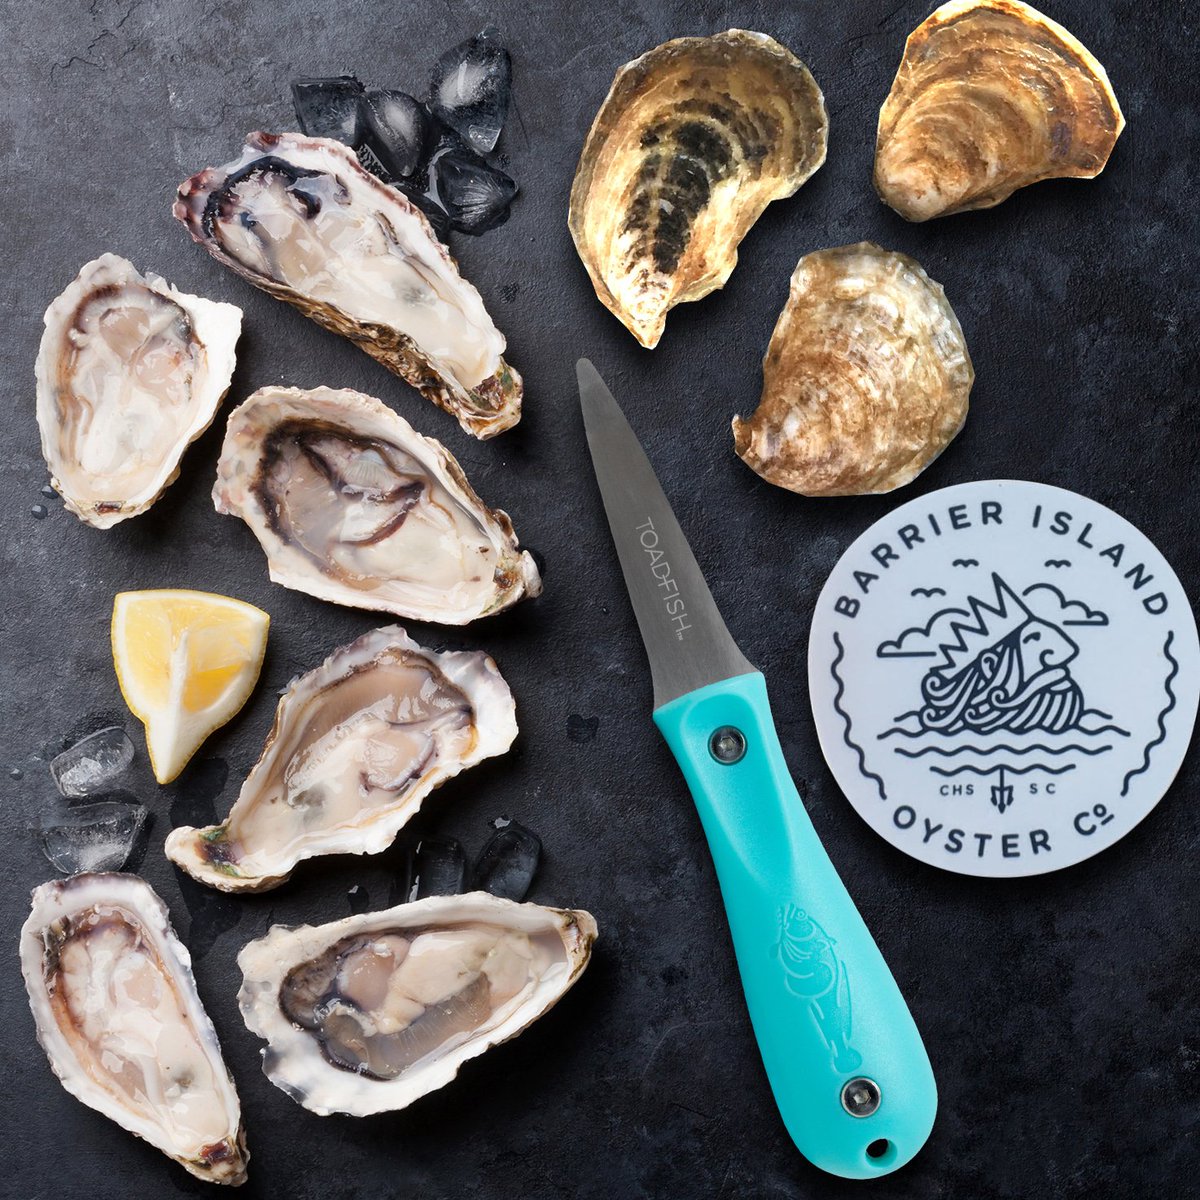 Today's the last day to enter our Father's Day giveaway with @ToadfishOutfit and Barrier Island Oyster Co.! Win the ultimate oyster experience for your dad, including Toadfish gear and a private tour of Barrier Island Oyster farm. Visit charlestonmag.com/fathersdaycont… for details.